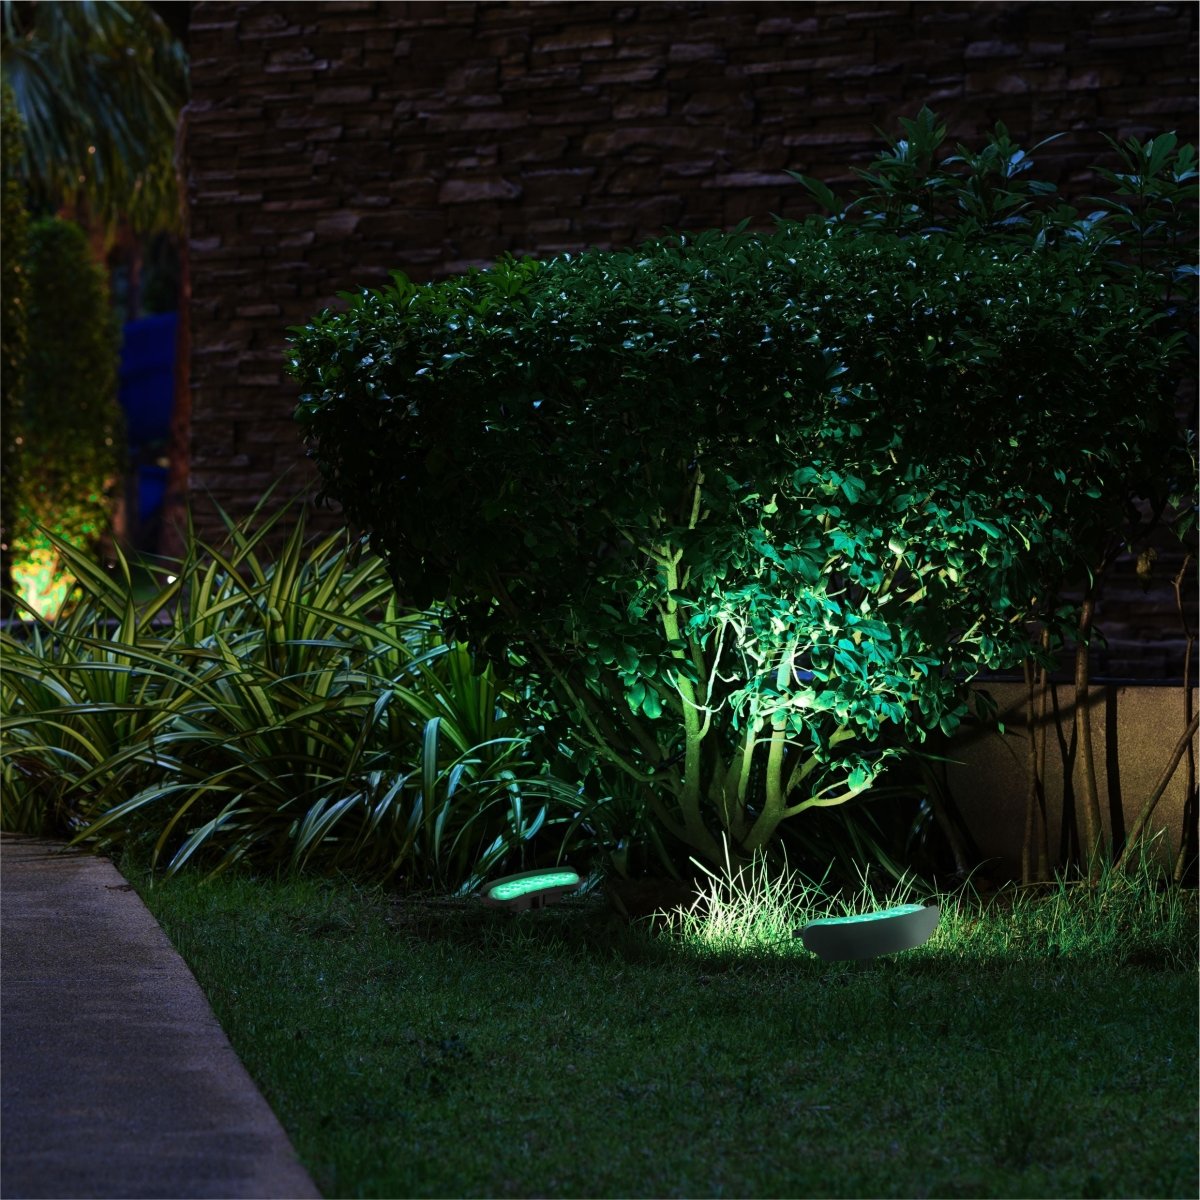 More exterior usage of Tree Washer LED Floodlight 12W 3000K Warm White or Green | TEKLED 224-03156